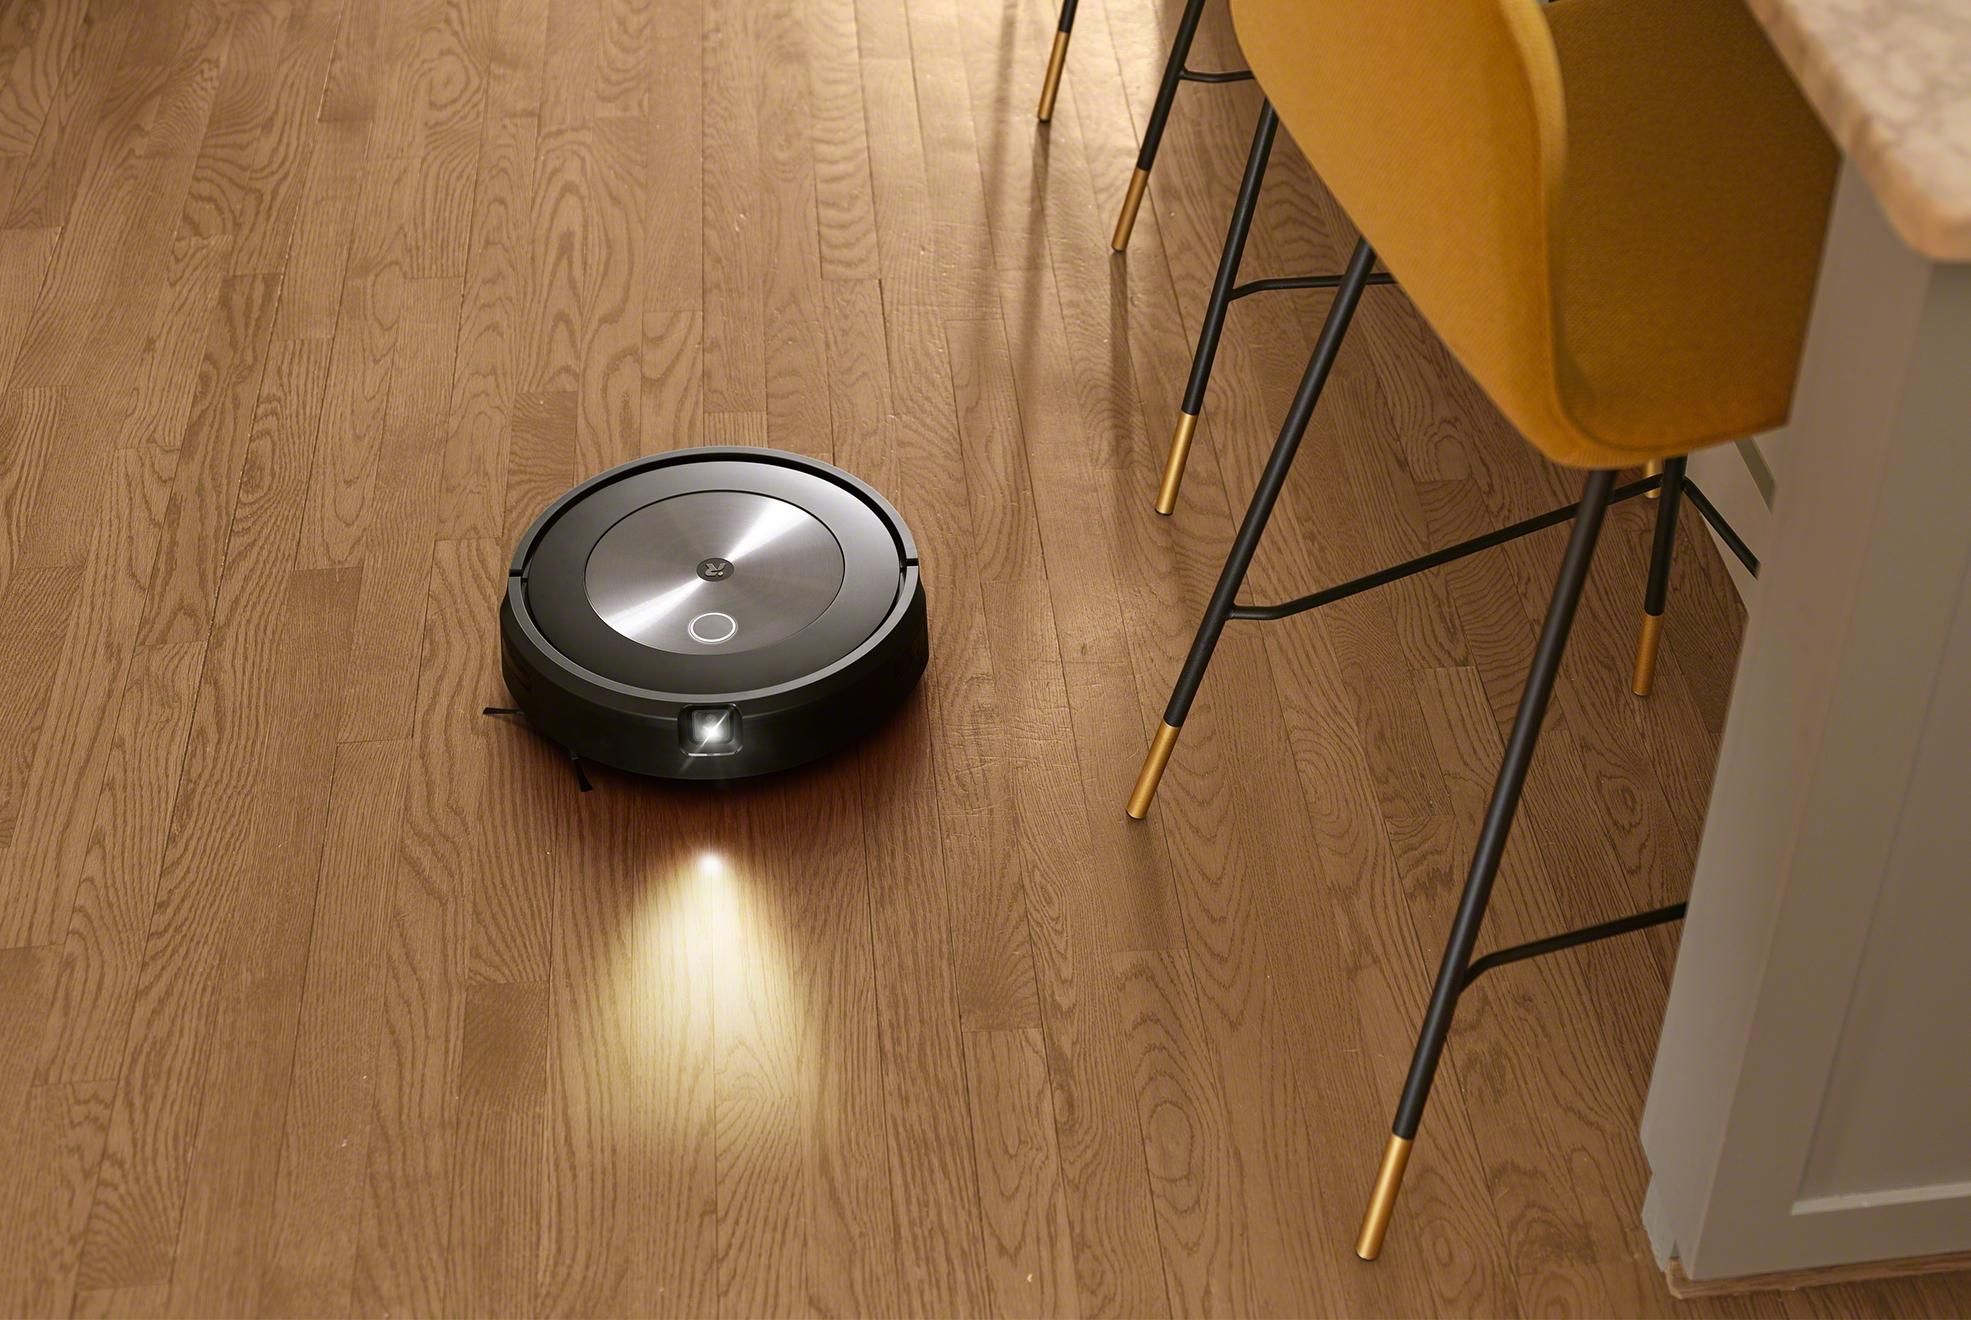 With New Roomba J7 Irobot Wants To, Are Roombas Good For Hardwood Floors